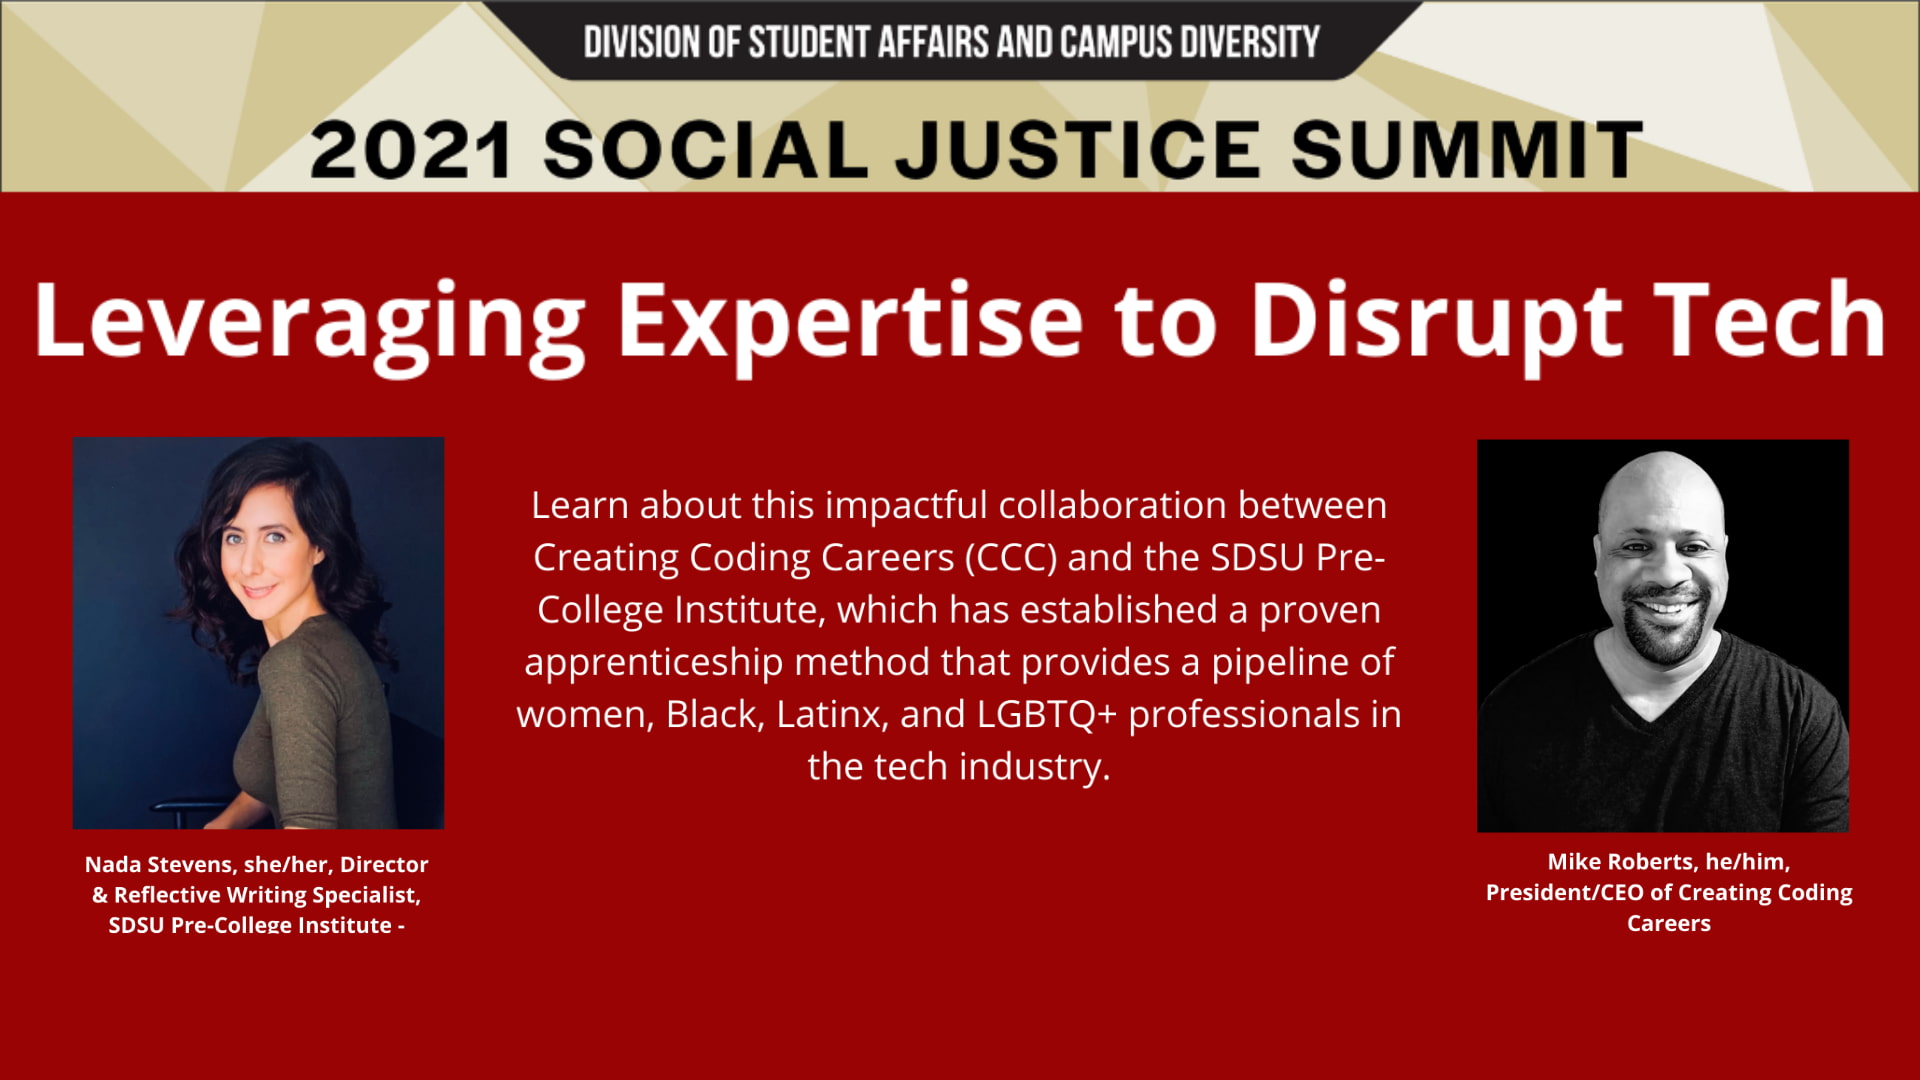 On Friday, November 5, 2021 the Office Of Community Engagement co-presented at the SDSU Social Justice Summit.